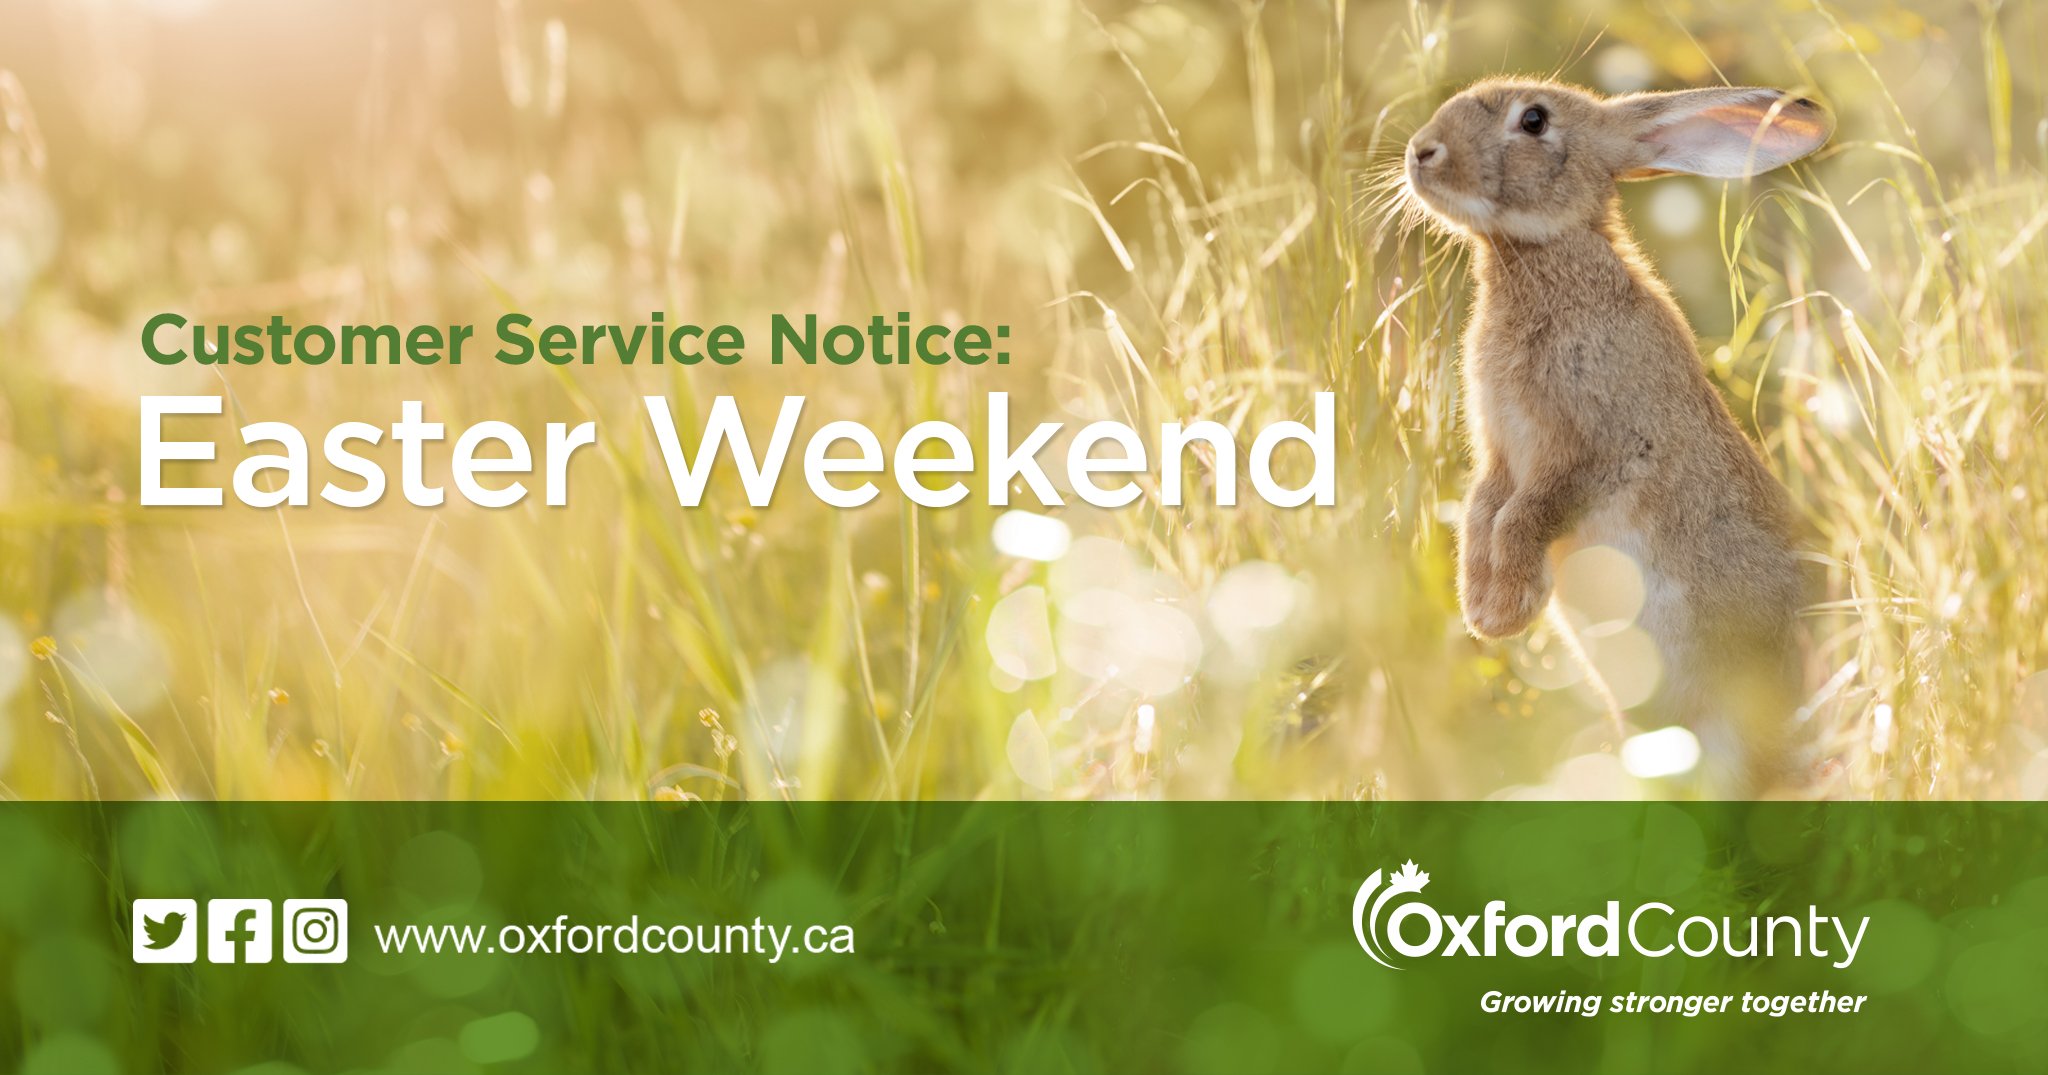 Easter weekend holiday hours social media graphic with a bunny in a field